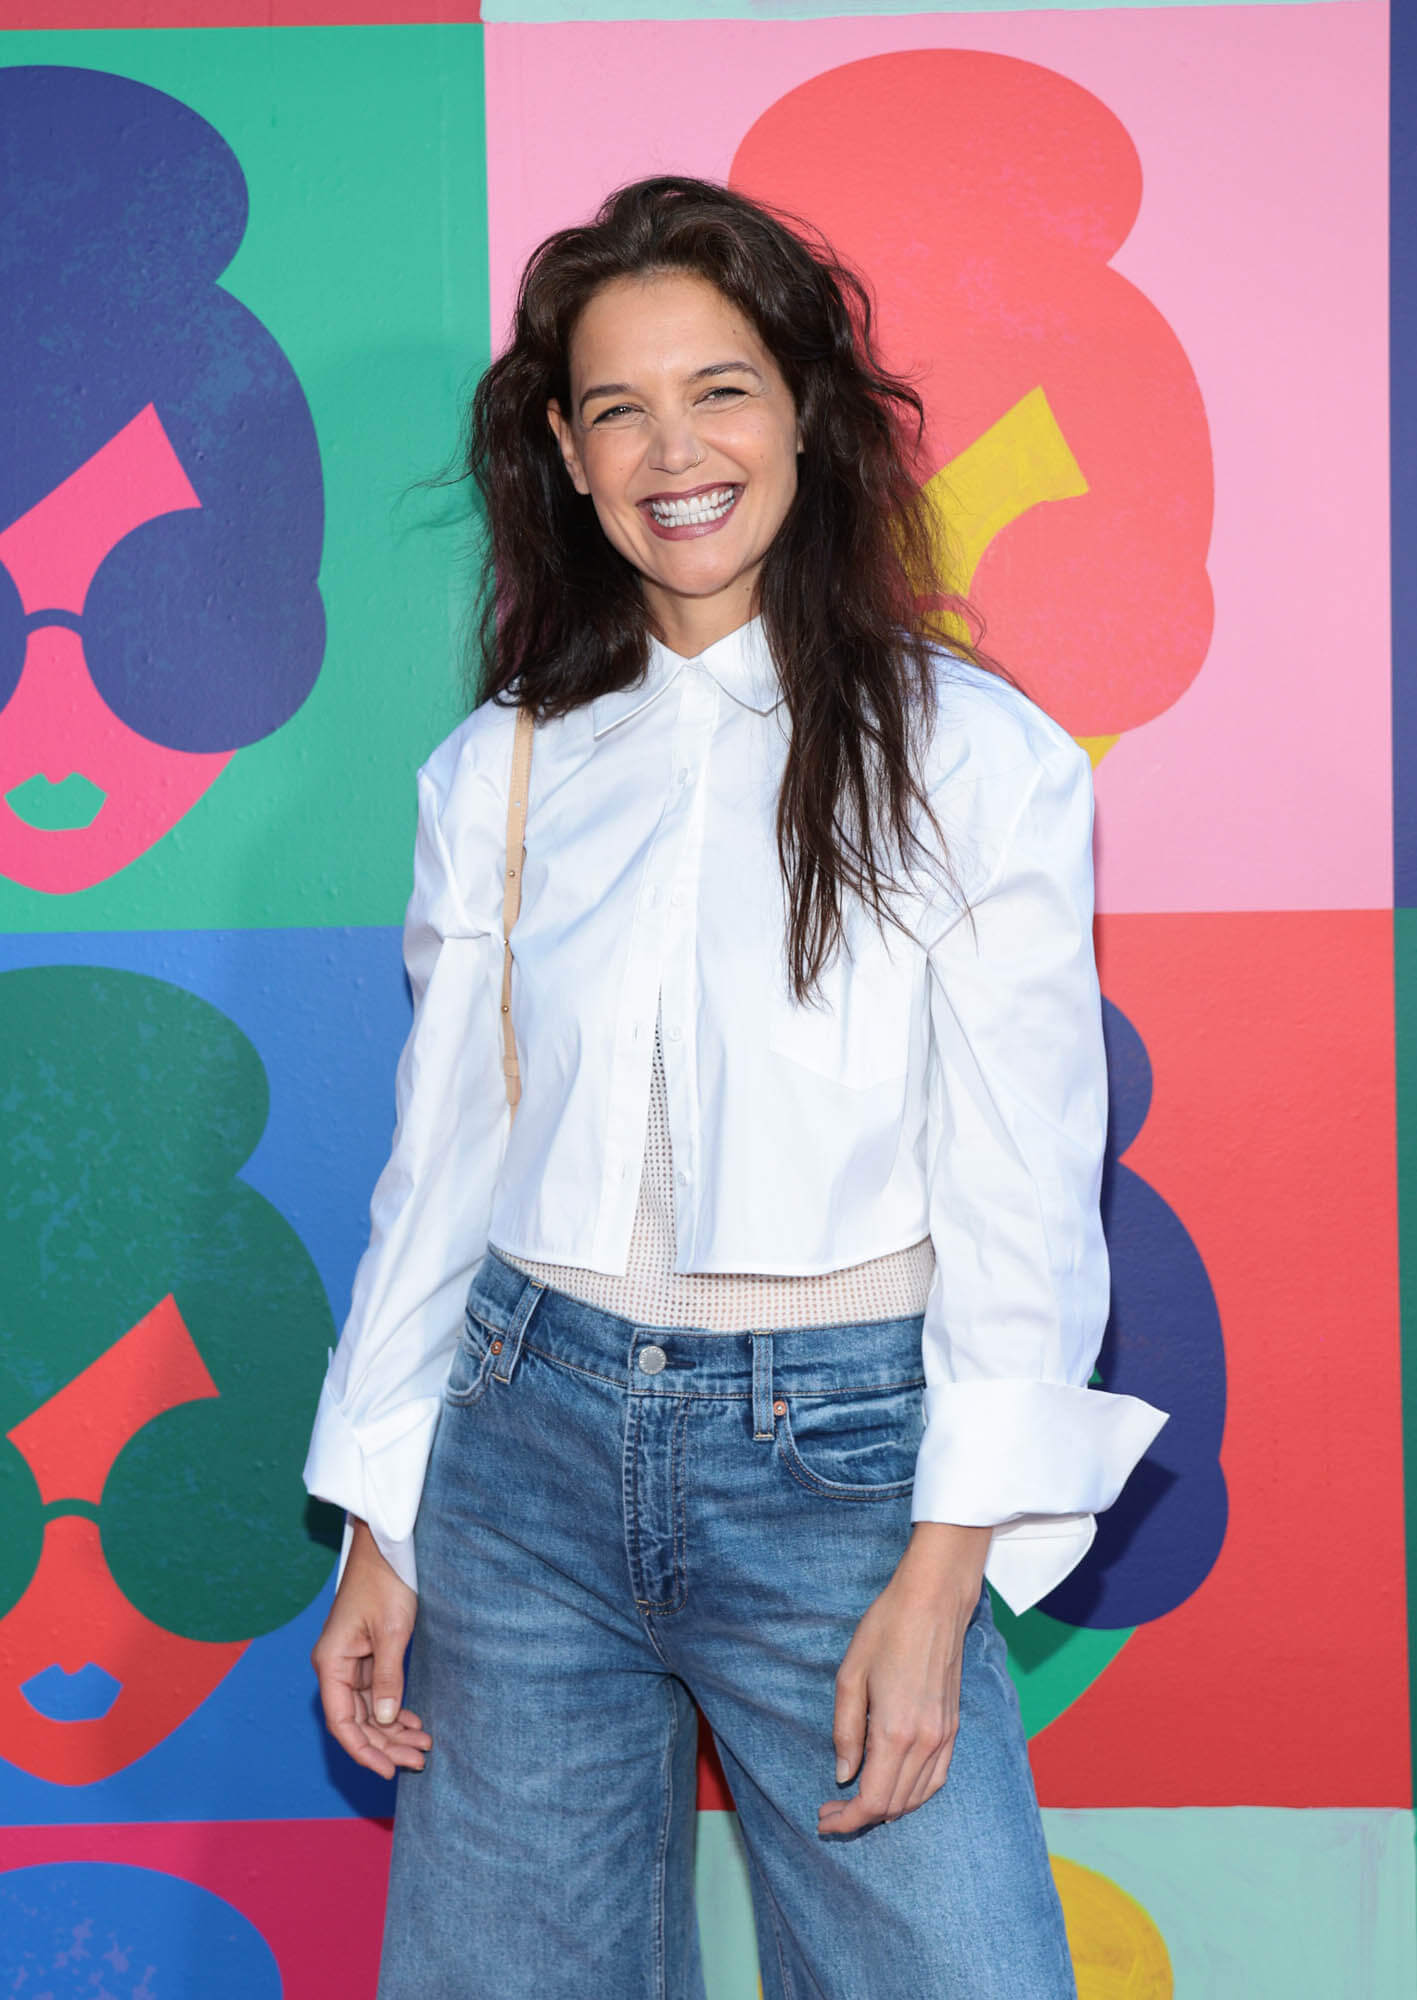 Katie Holmes’ good jeans at Alice + Olivia’s Camp Pride event